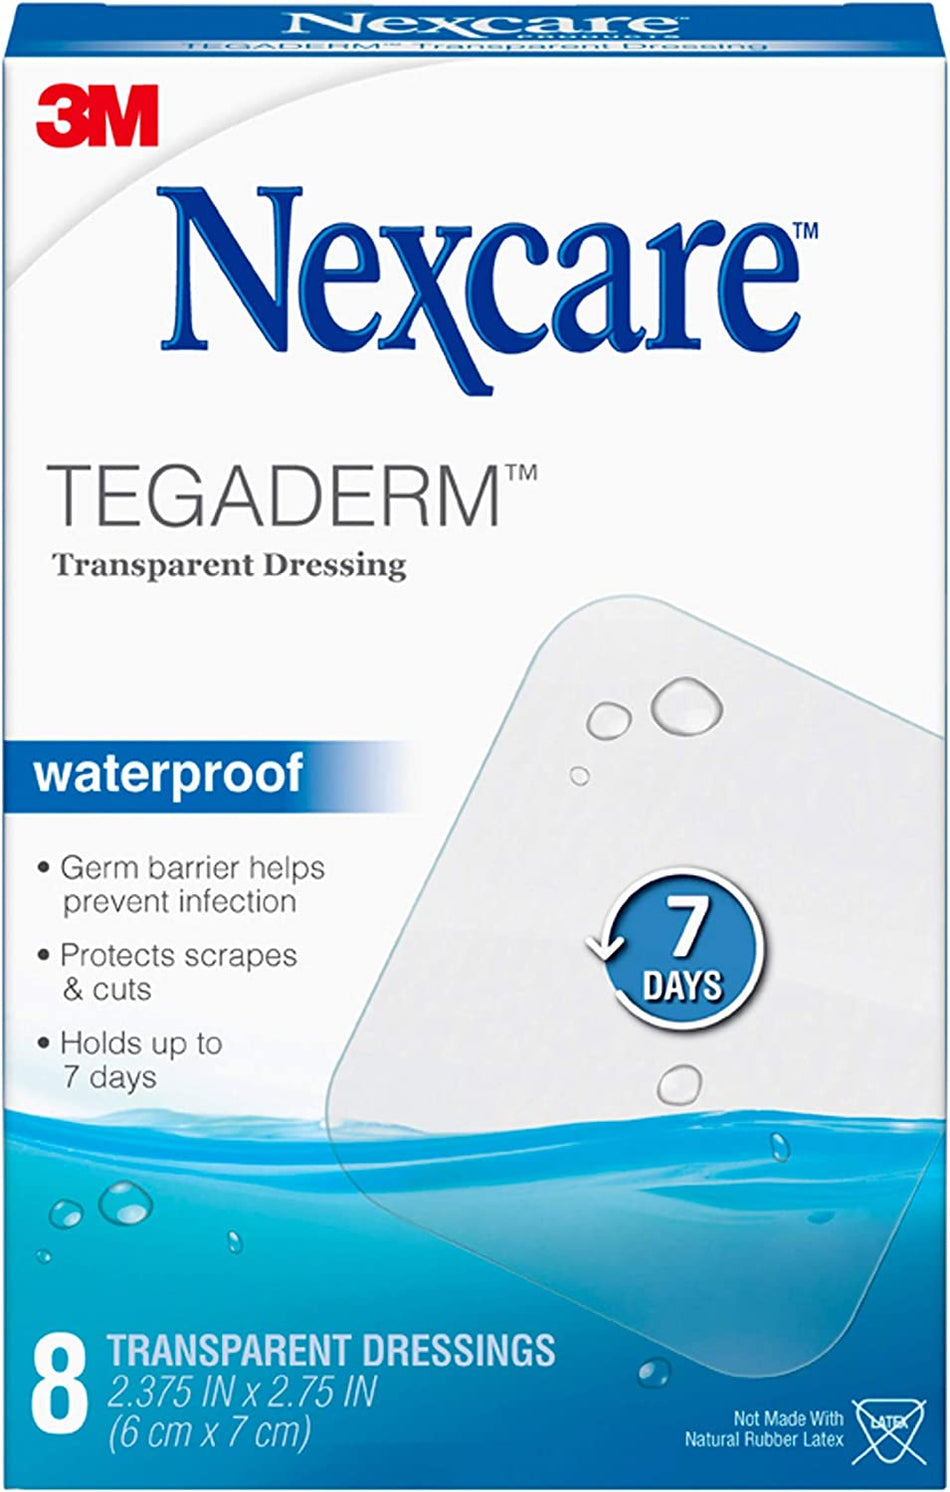 Code 1 Supply 3M H1624 Nexcare Tegaderm Waterproof Transparent Dressing 2 3/8 in. x 2 3/4 in. (Box of 8)